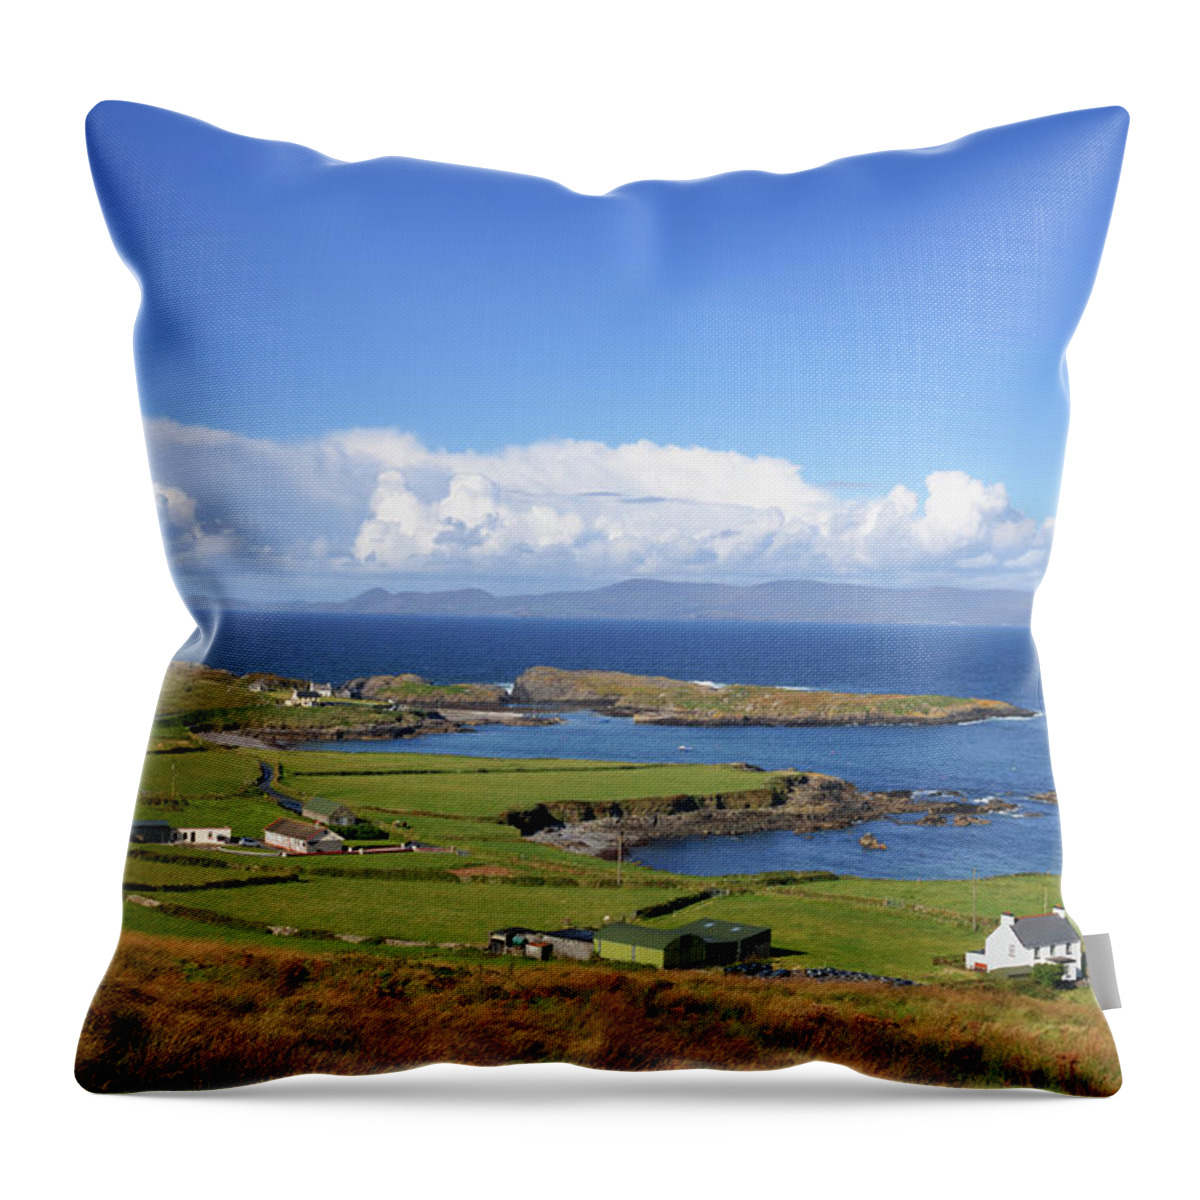 Scenics Throw Pillow featuring the photograph West Cork by Johngollop